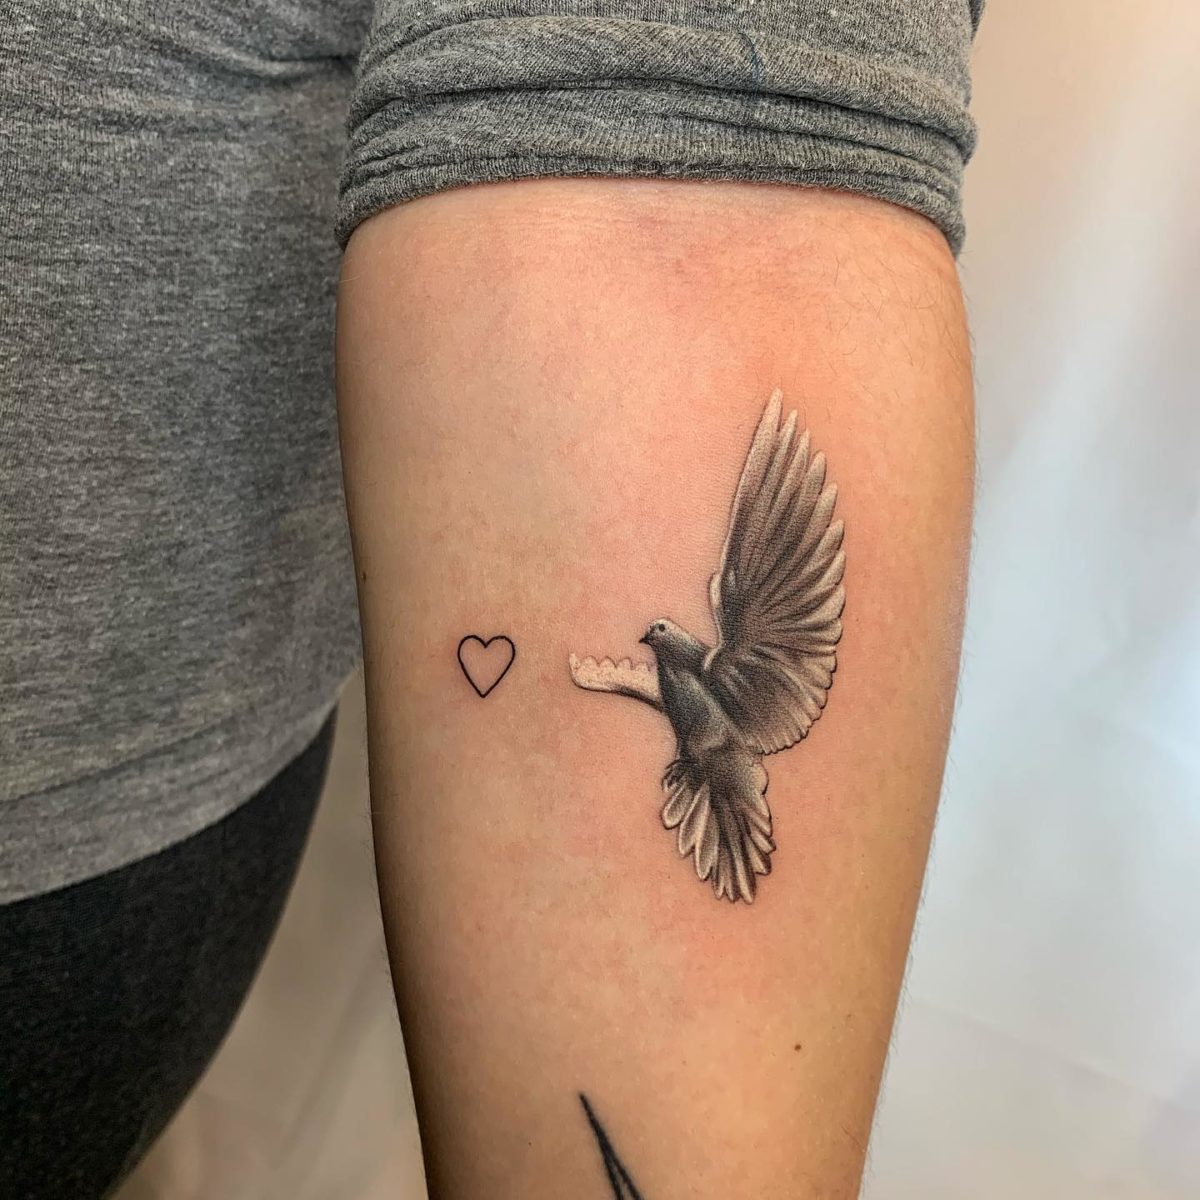 Small Tattoos for Women | Small dove tattoos, Flying bird tattoo, Tattoos  for women small